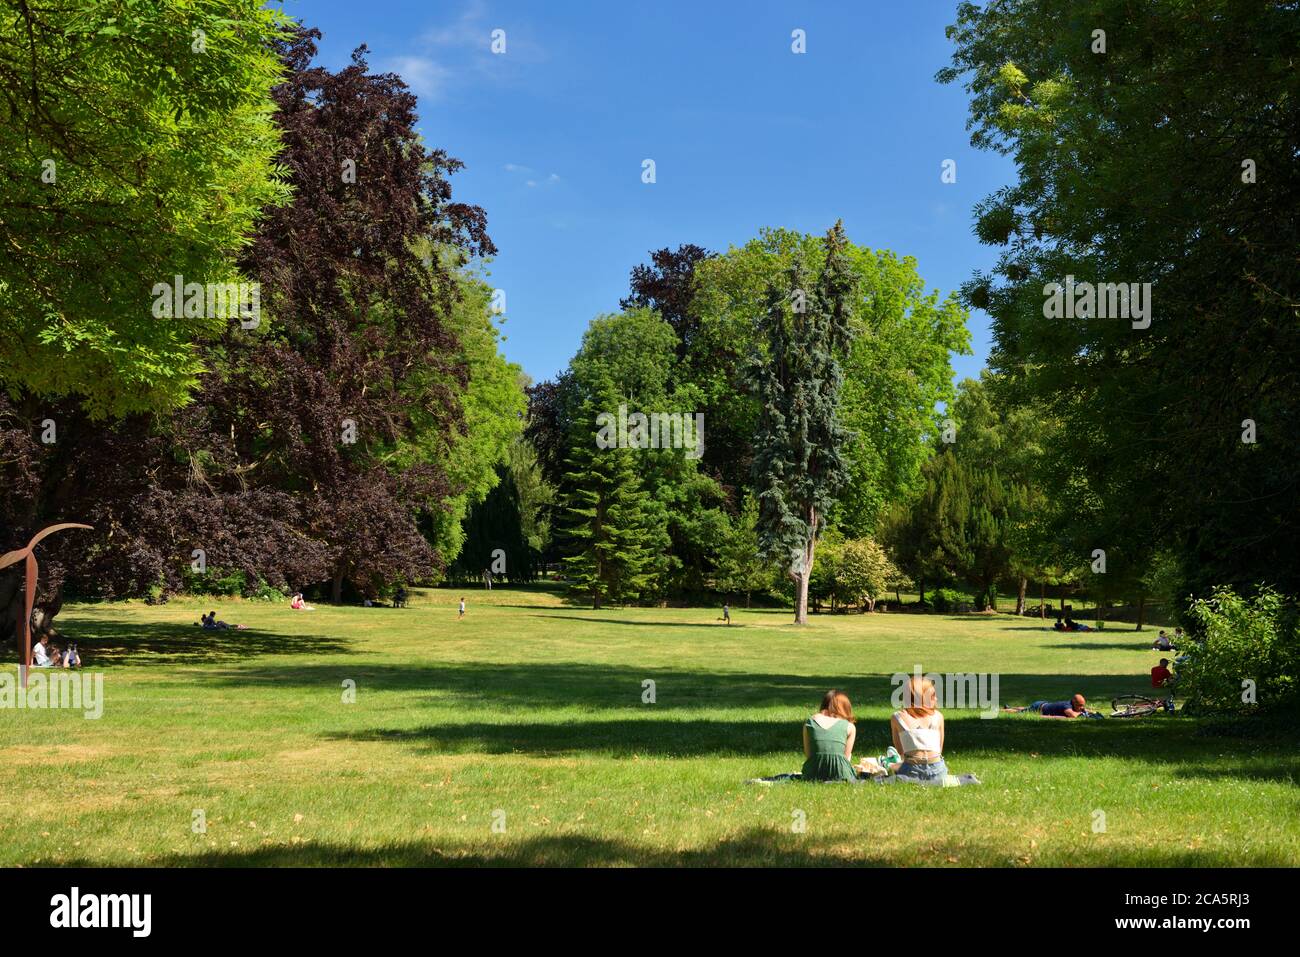 France, Nord, Douai, Charles Bertin Park, two youn women sitting in the grass Stock Photo